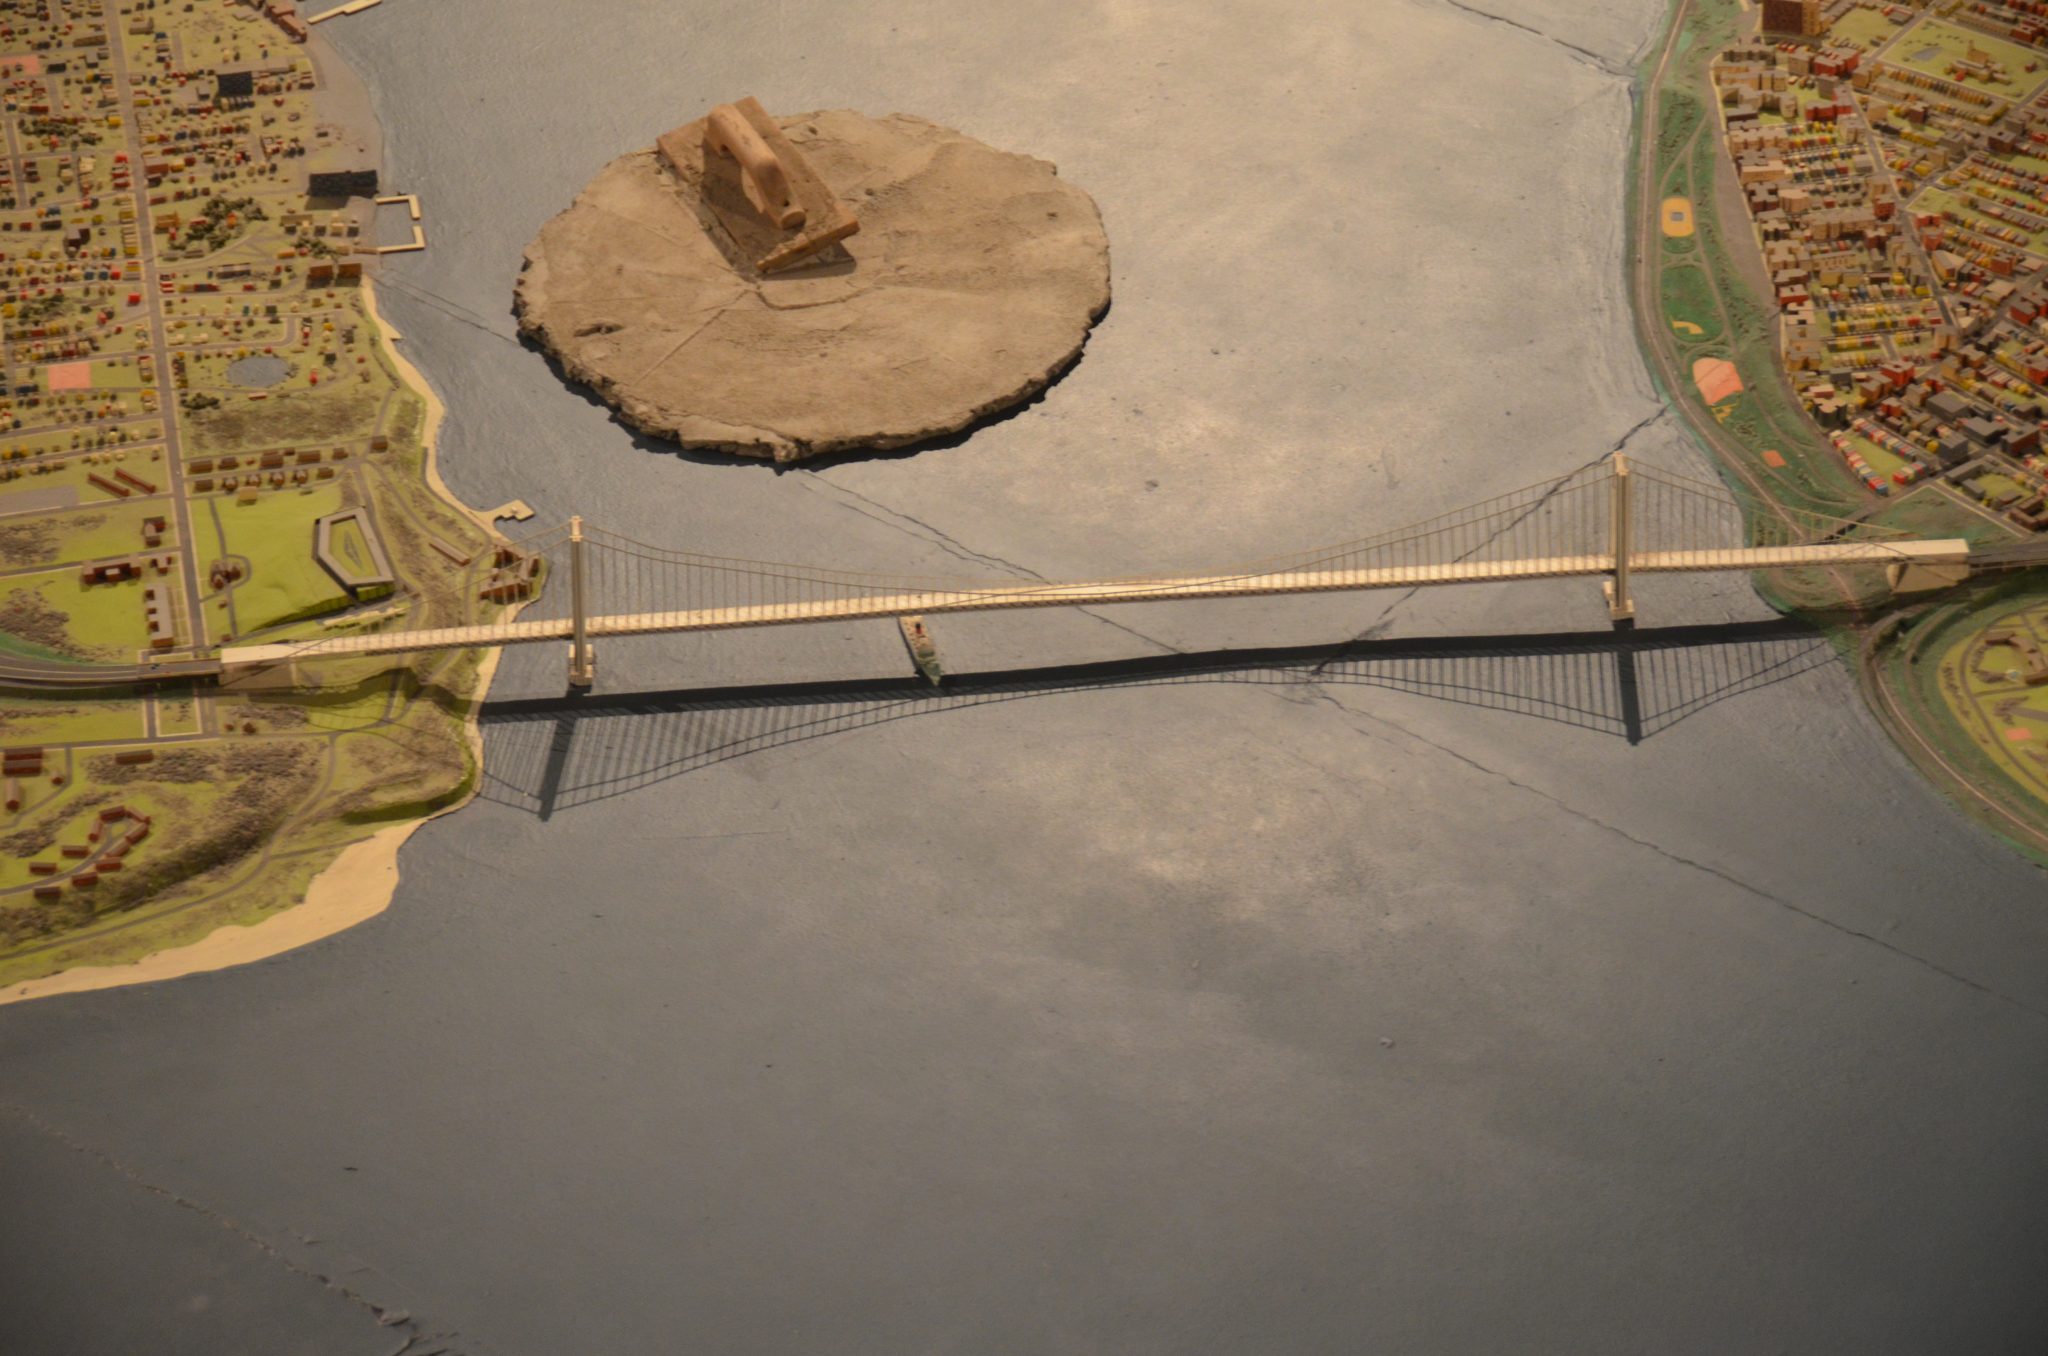 Queens Museum of Art | The Panorama of the City of New York | the Verrazano-Narrows bridge, linking Staten Island & Brooklyn. (And a giant iceberg?)